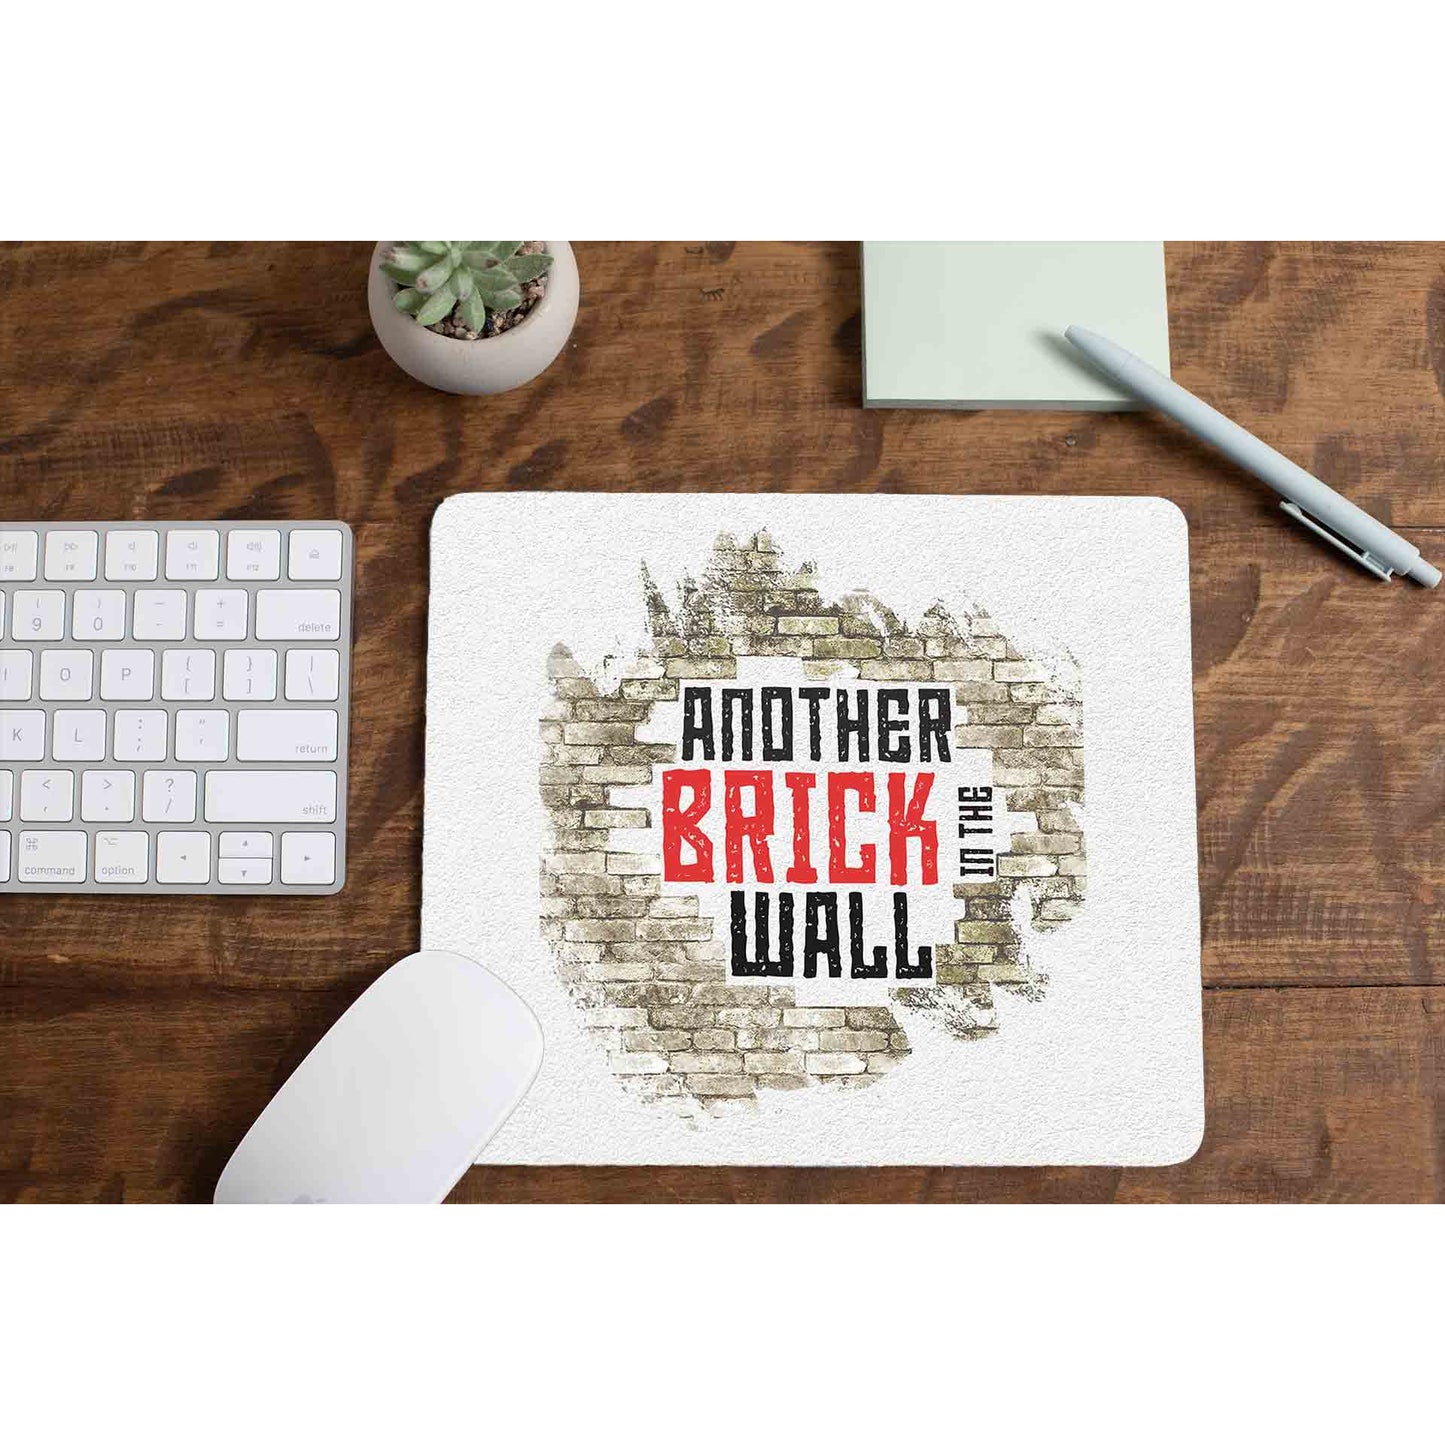 Pink Floyd Mousepad gaming logitech mouse pad large online price - Another Brick In The Wall The Banyan Tee TBT